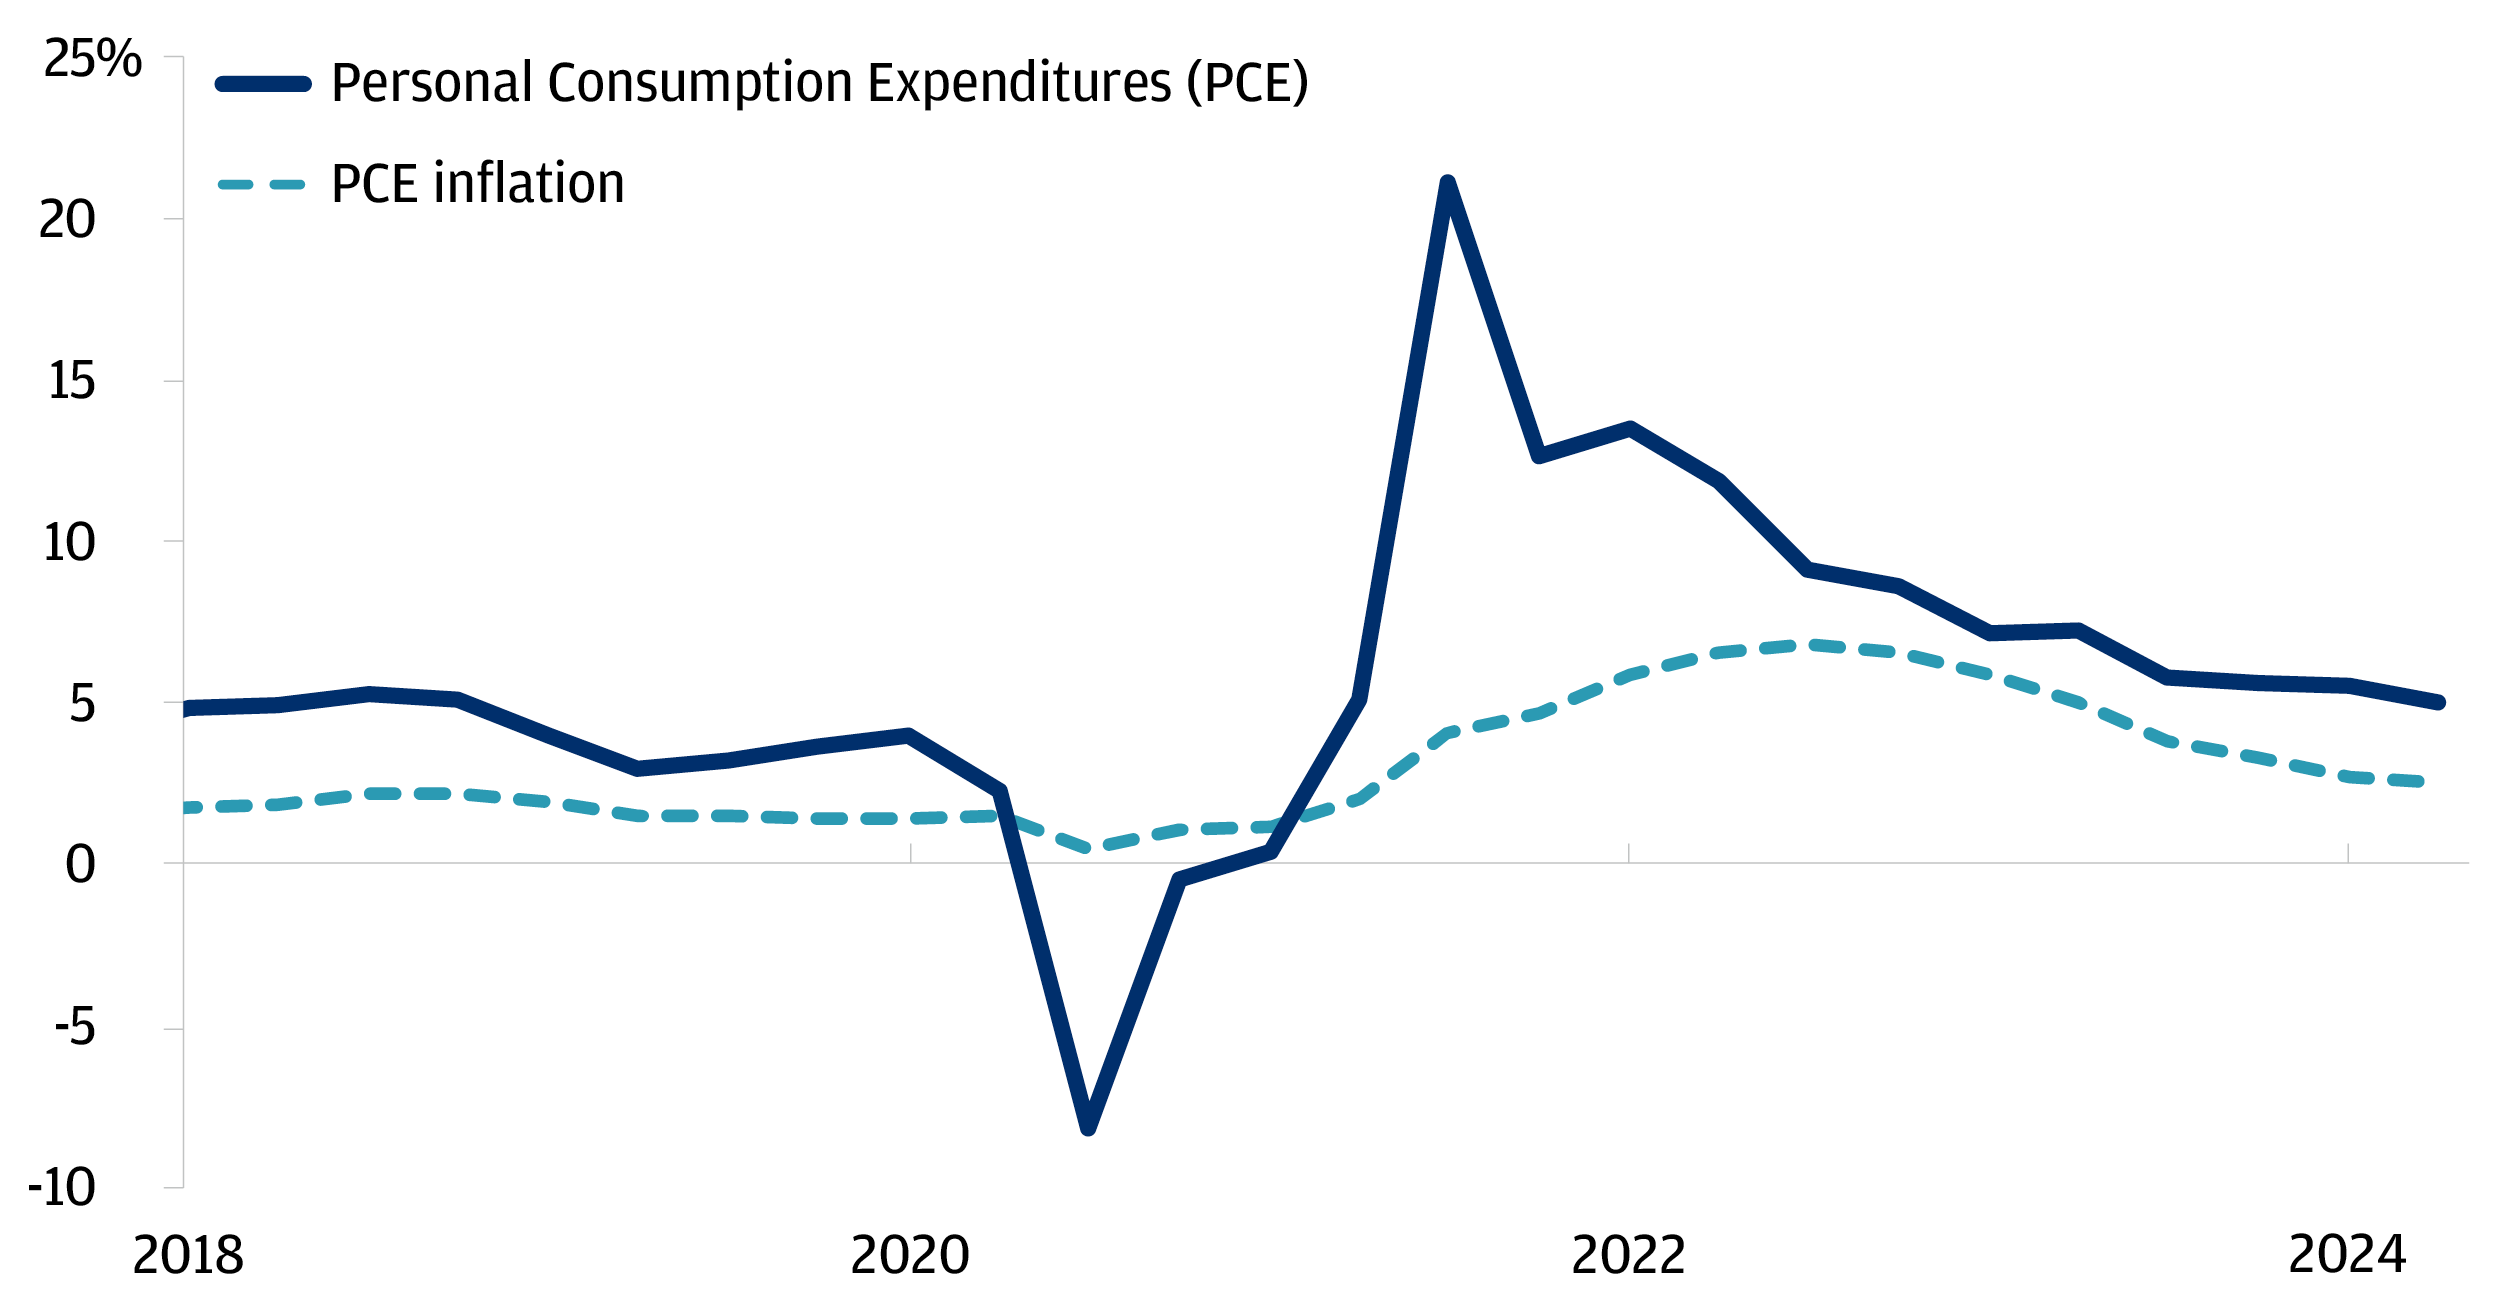 Line chart showing Personal Consumption Expenditures (PCE) and PCE inflation both in year-over-year (YoY) percentage terms from 2018 through March 2024; based on quarterly data. From 2018 to 2019 both time series exhibit stability but in 2020, PCE shows a substantial decline which subsequently rebounded, reaching a peak in 2021 of 21.1% YoY. Since the peak, it has gradually moderated with the latest data point standing at 5.0% YoY. On the other hand, PCE YoY inflation shows an upward trend beginning in 2021 but has since similarly moderated. 